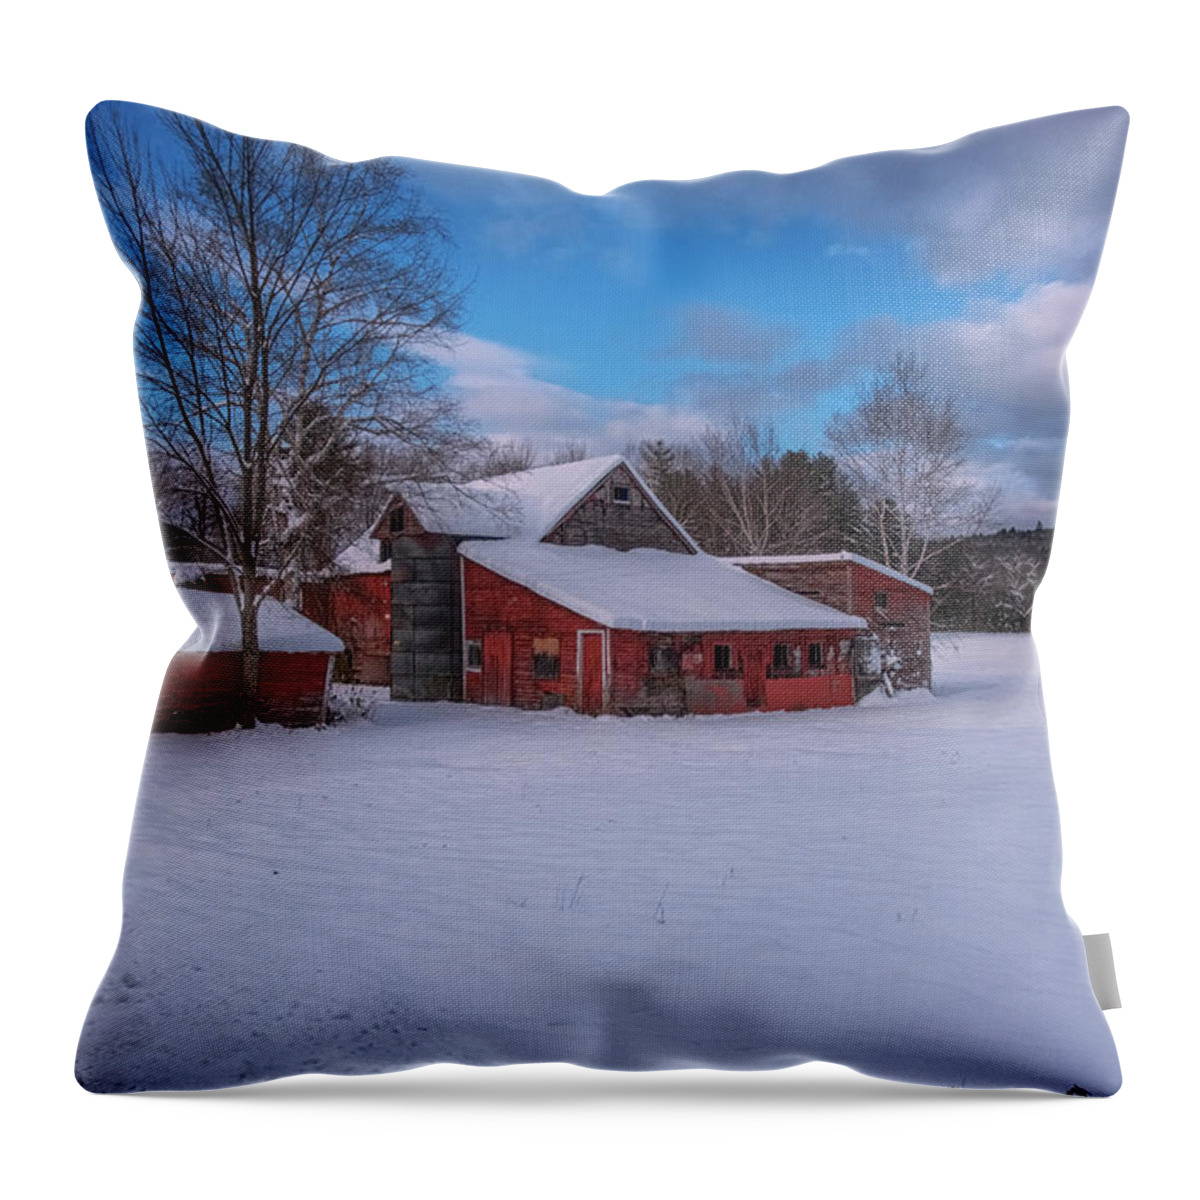 Williamsville Vermont Throw Pillow featuring the photograph Barns In Winter by Tom Singleton